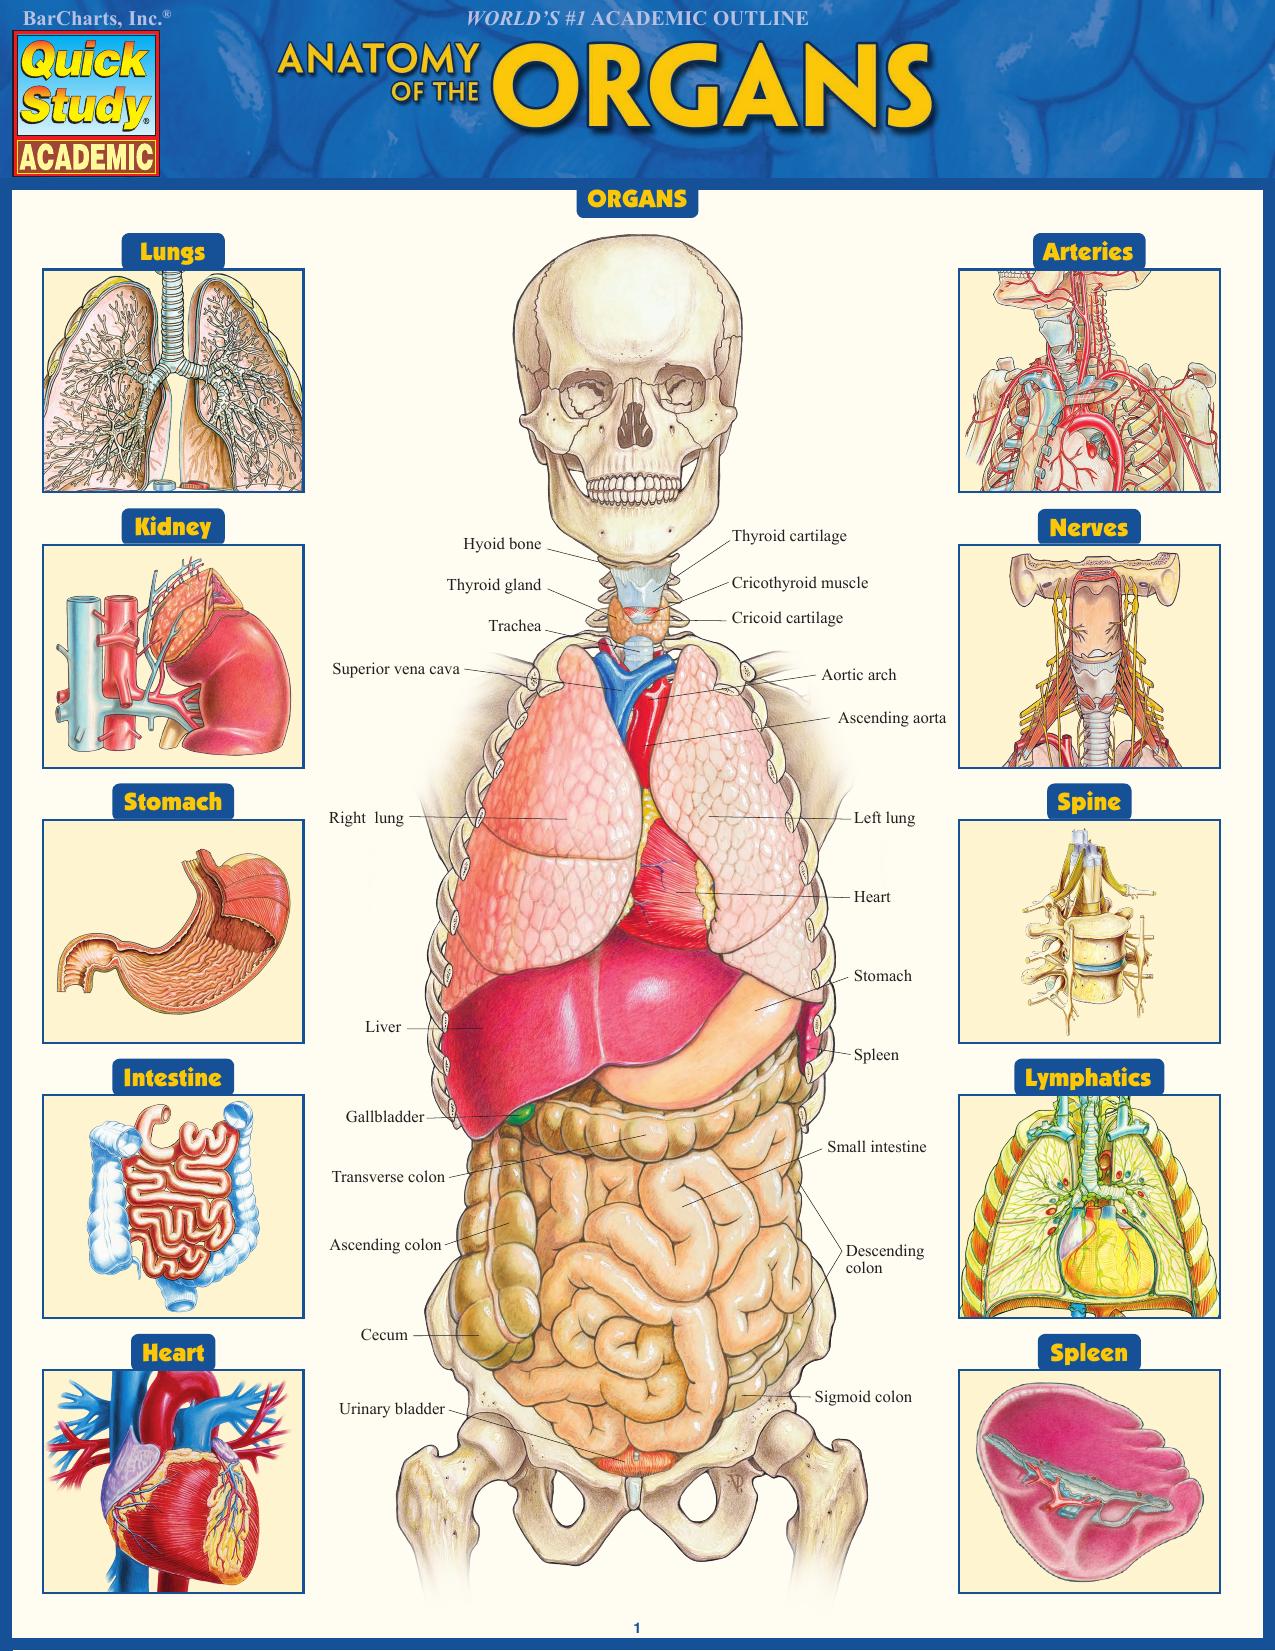 Anatomy of the Organs (Quick Study Academic) SoftArchive